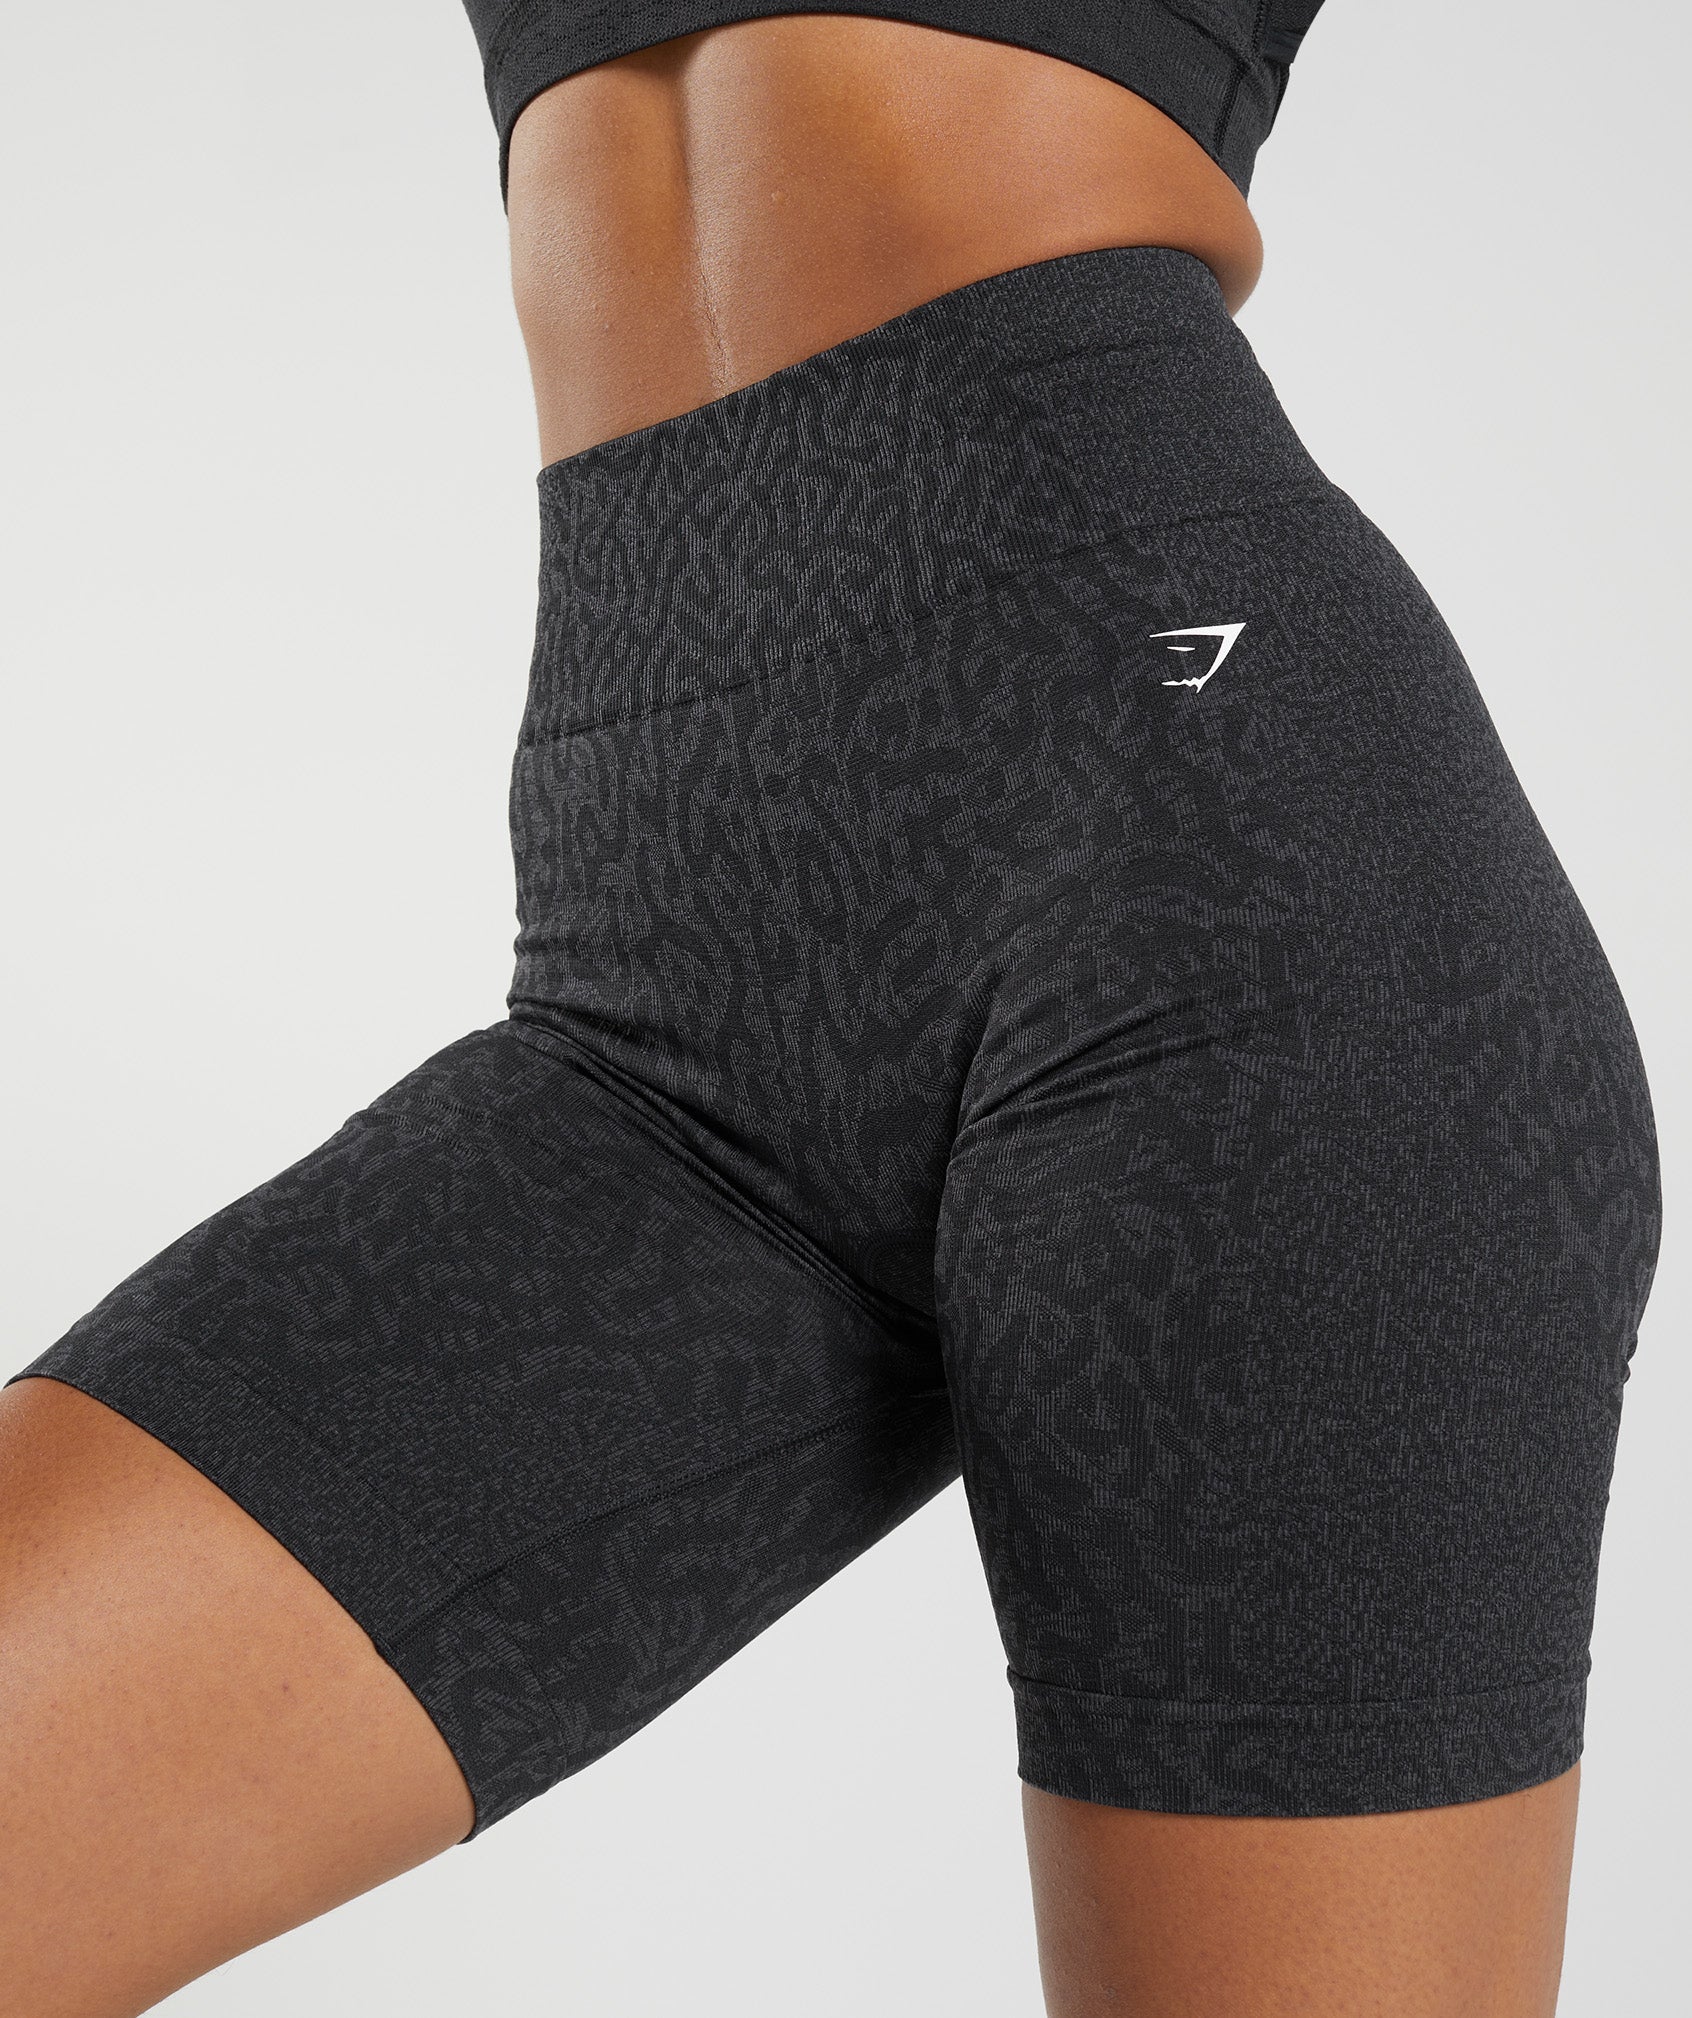 Adapt Animal Seamless Cycling Shorts in Reef |  Black - view 6